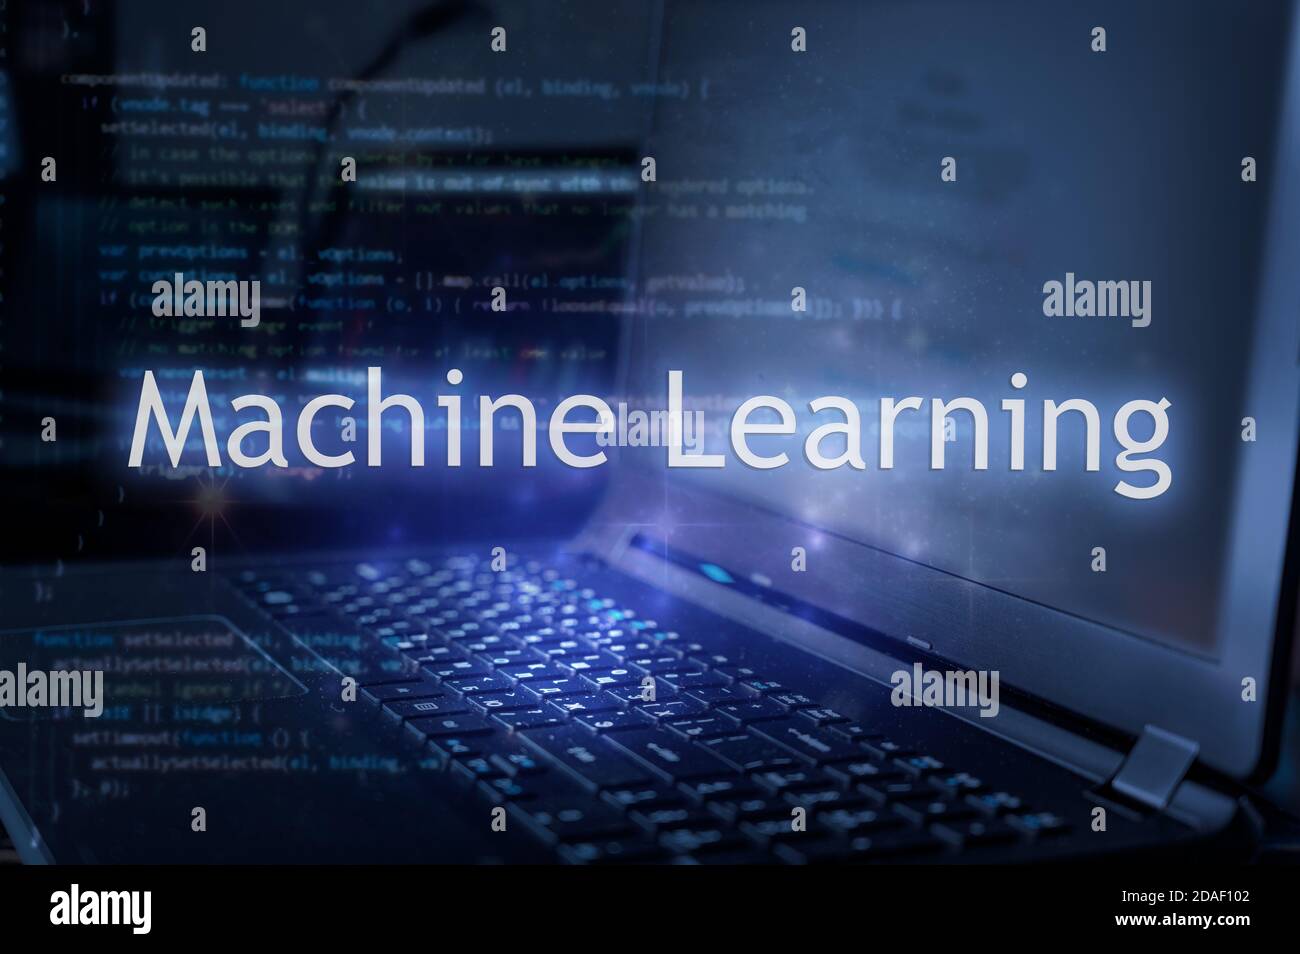 Machine learning inscription against laptop and code background. Learn machine learning programming language, computer courses, training. Stock Photo